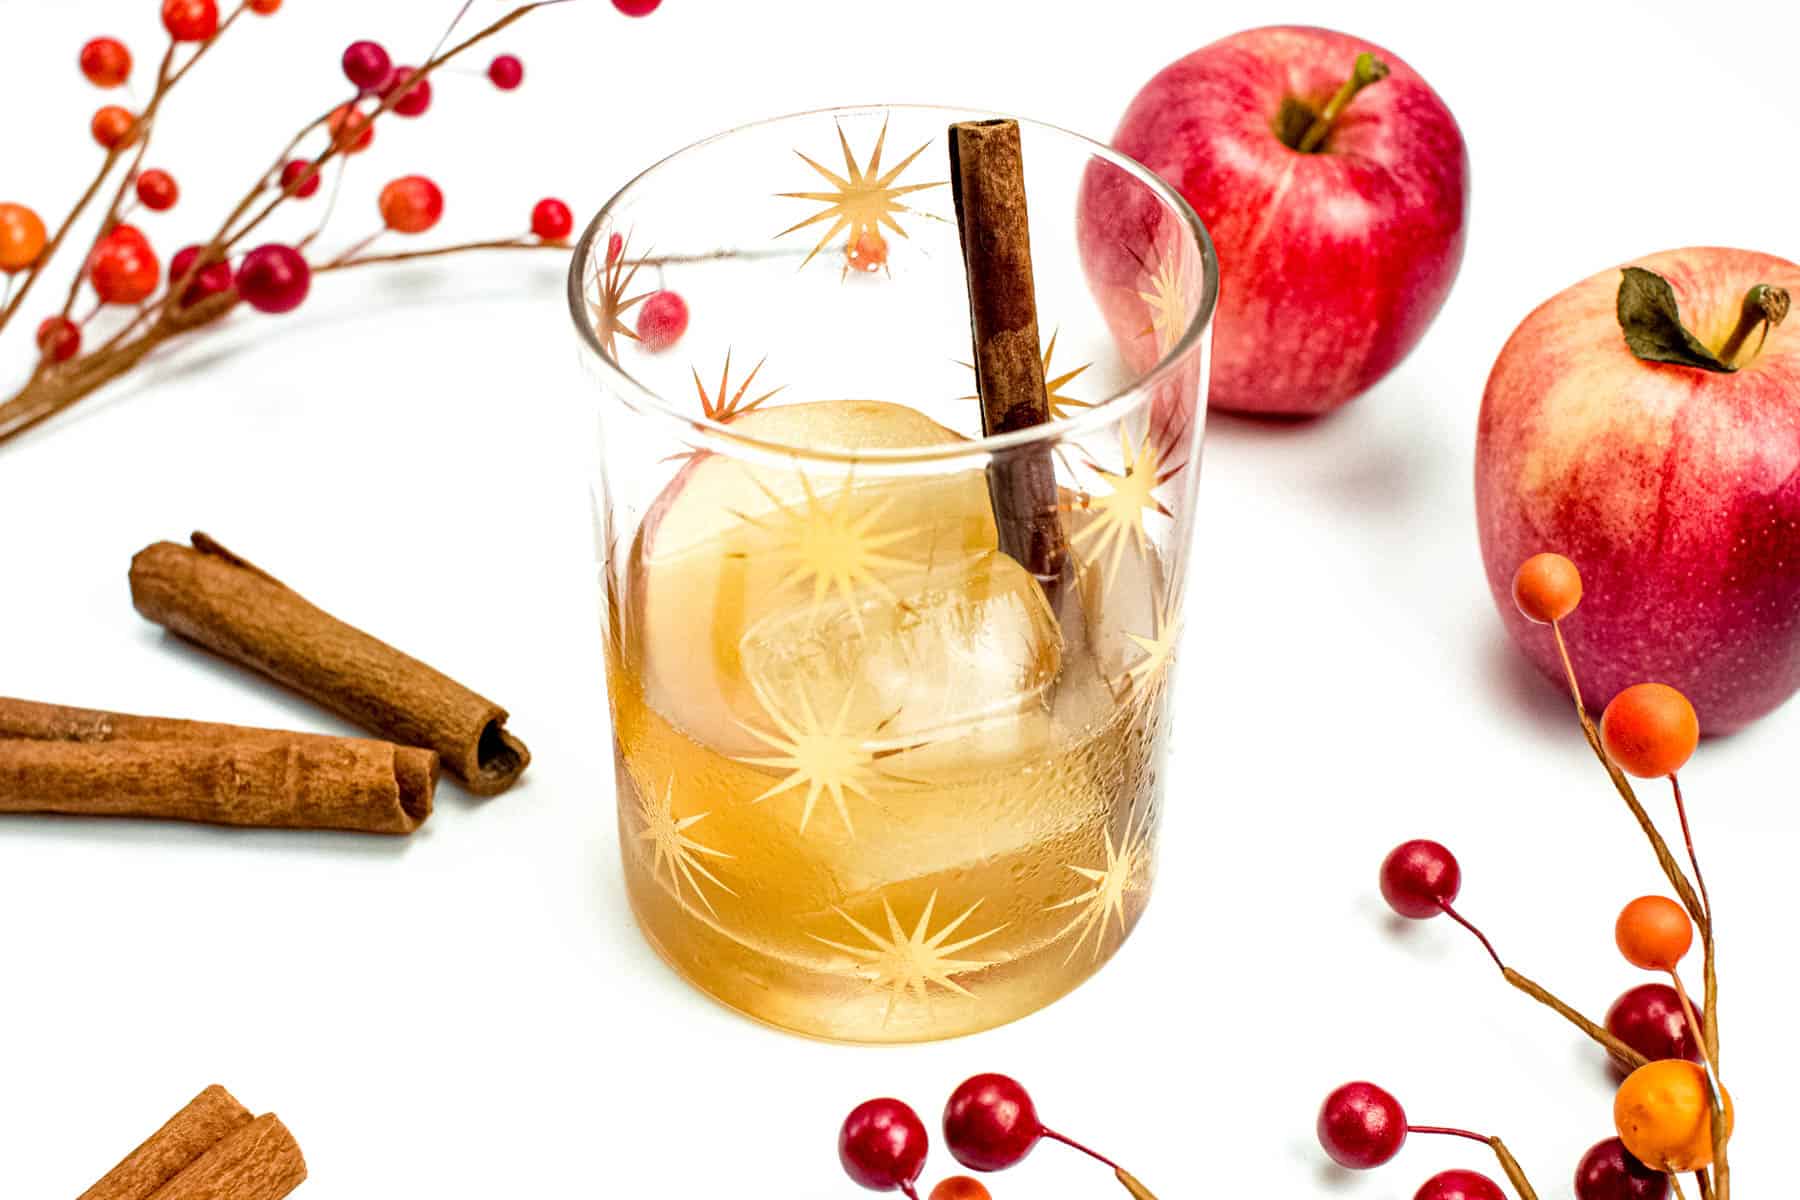 A rocks glass with large square ice cube and golden liquid is garnished with a cinnamon stick and apple slice. Around it on a white background sit apples, cinnamon sticks and sprigs of red berries